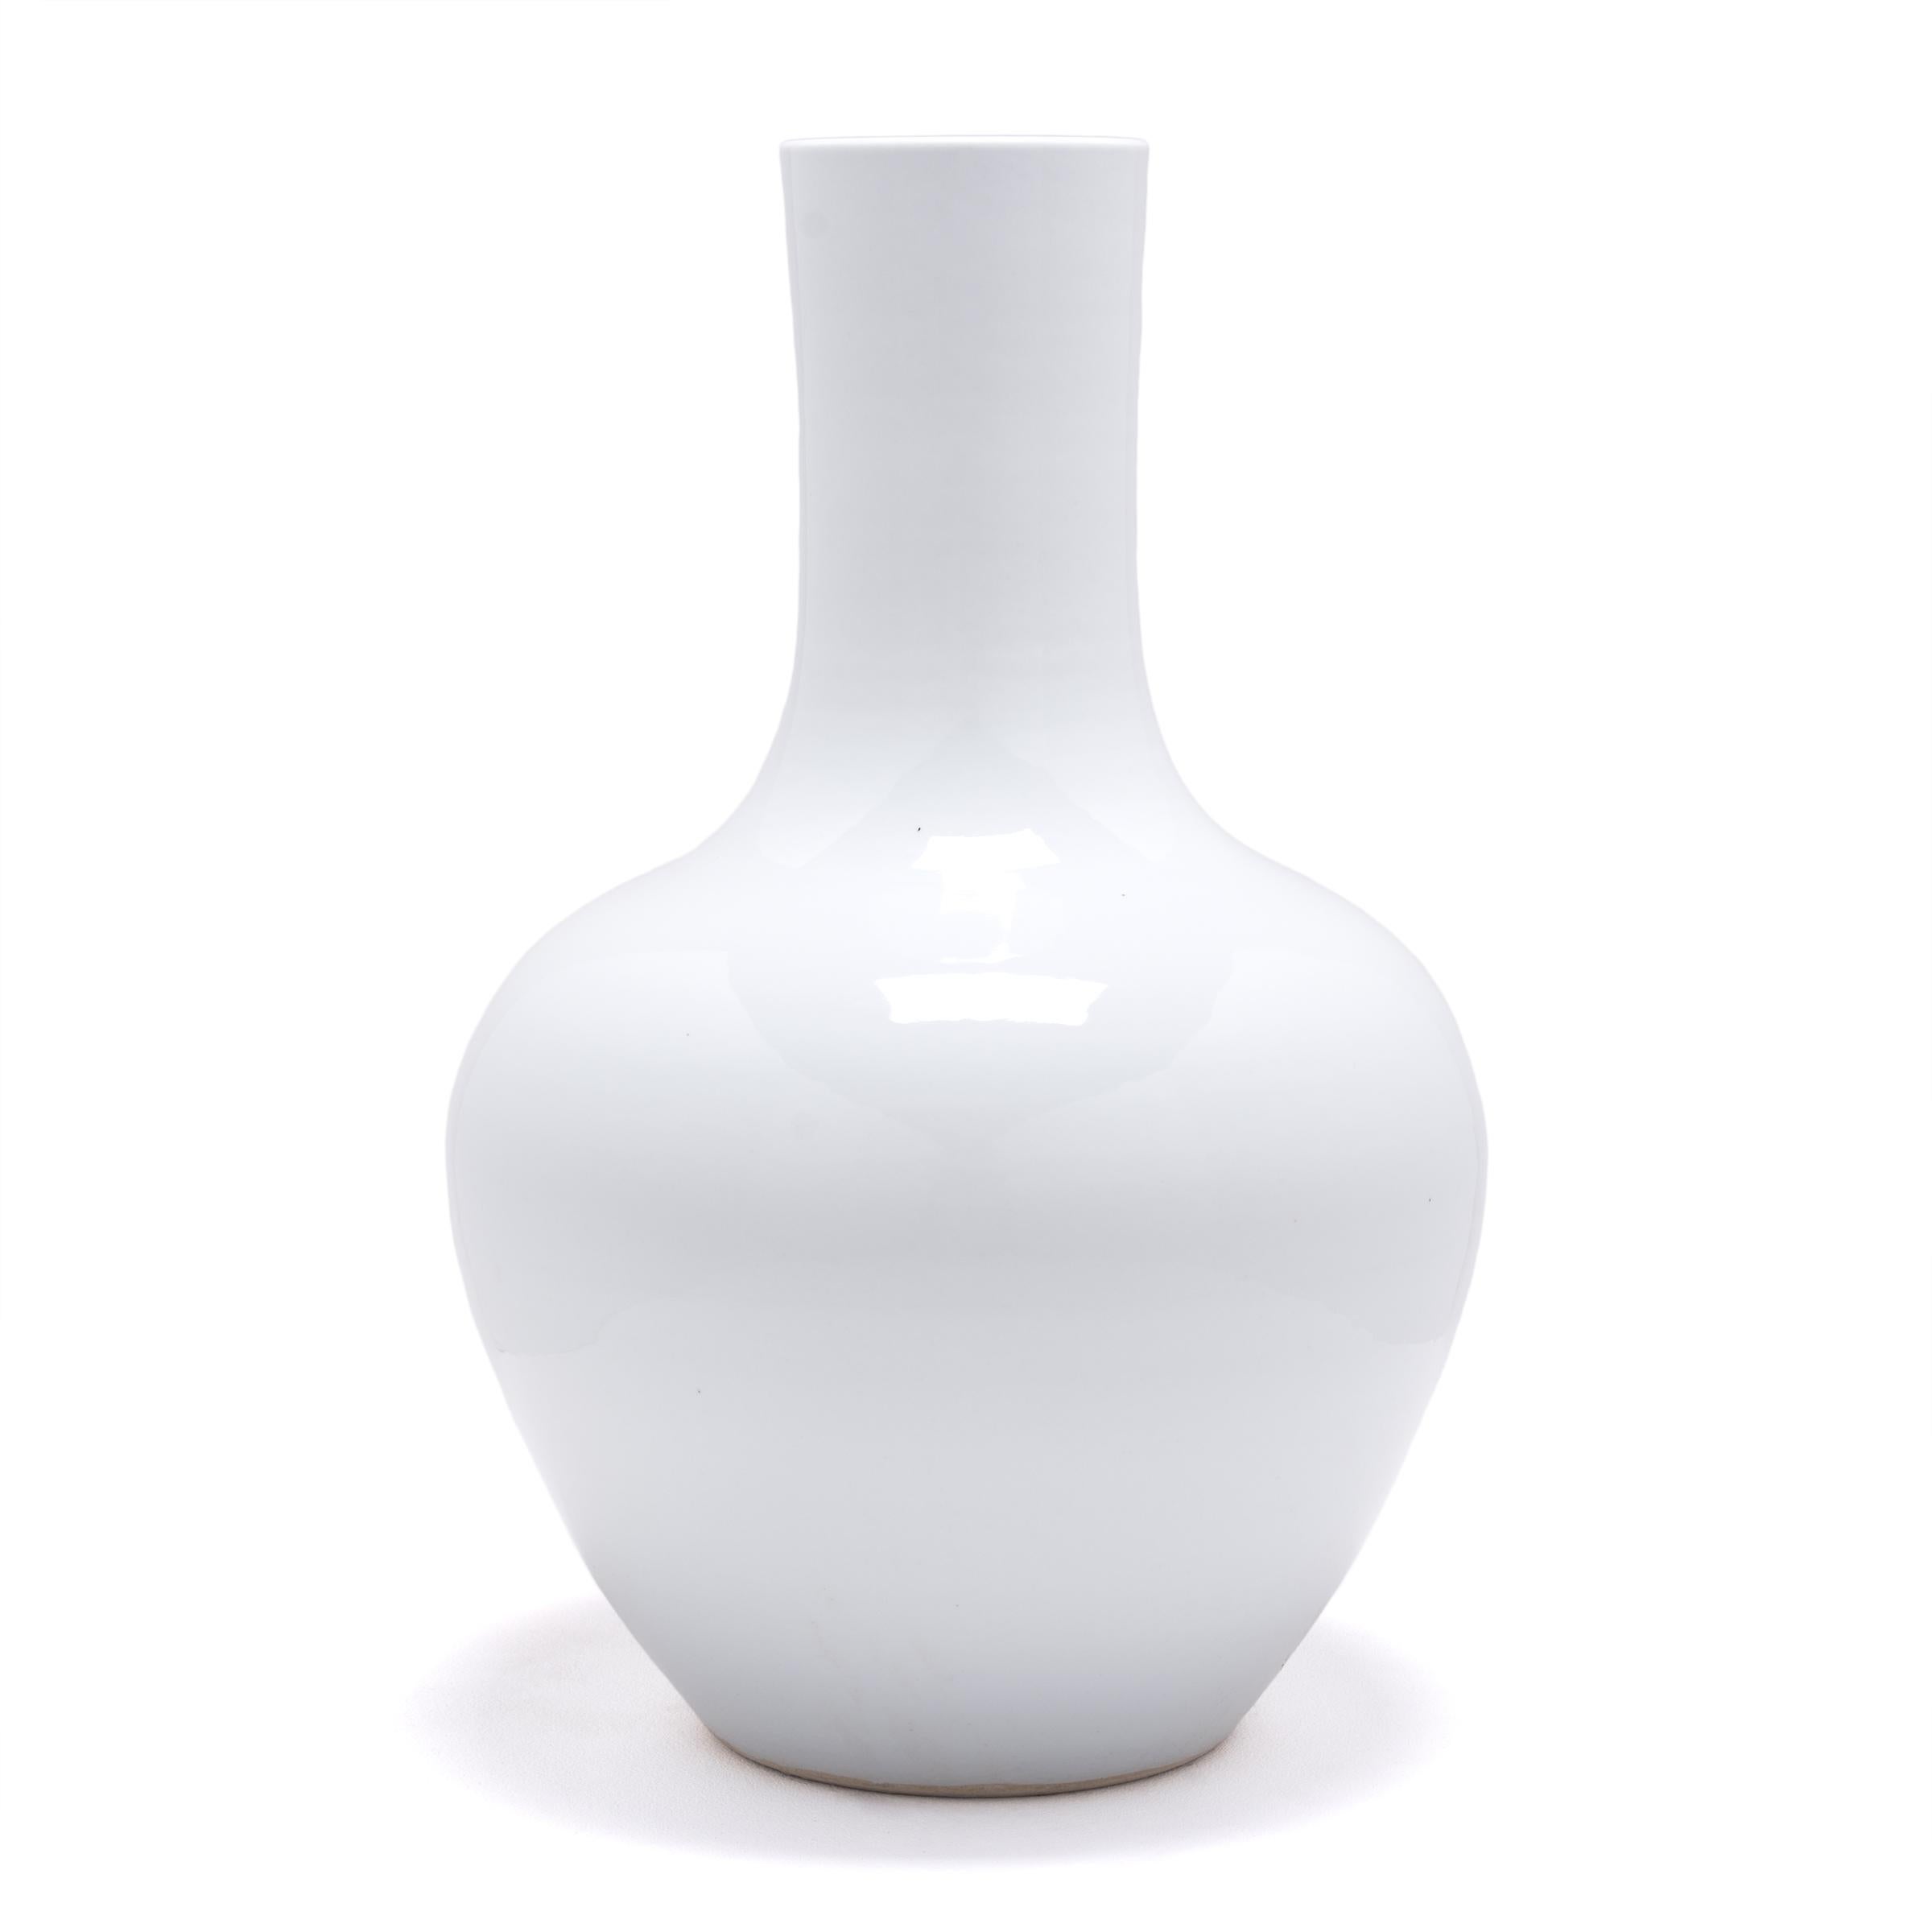 Drawing on a long Chinese tradition of monochrome ceramics, this tall gooseneck vase is glazed in an all-over cool white glaze. The vase features a rounded body with high shoulders and a narrow cylindrical neck, a classic form known as 'tianqiuping'